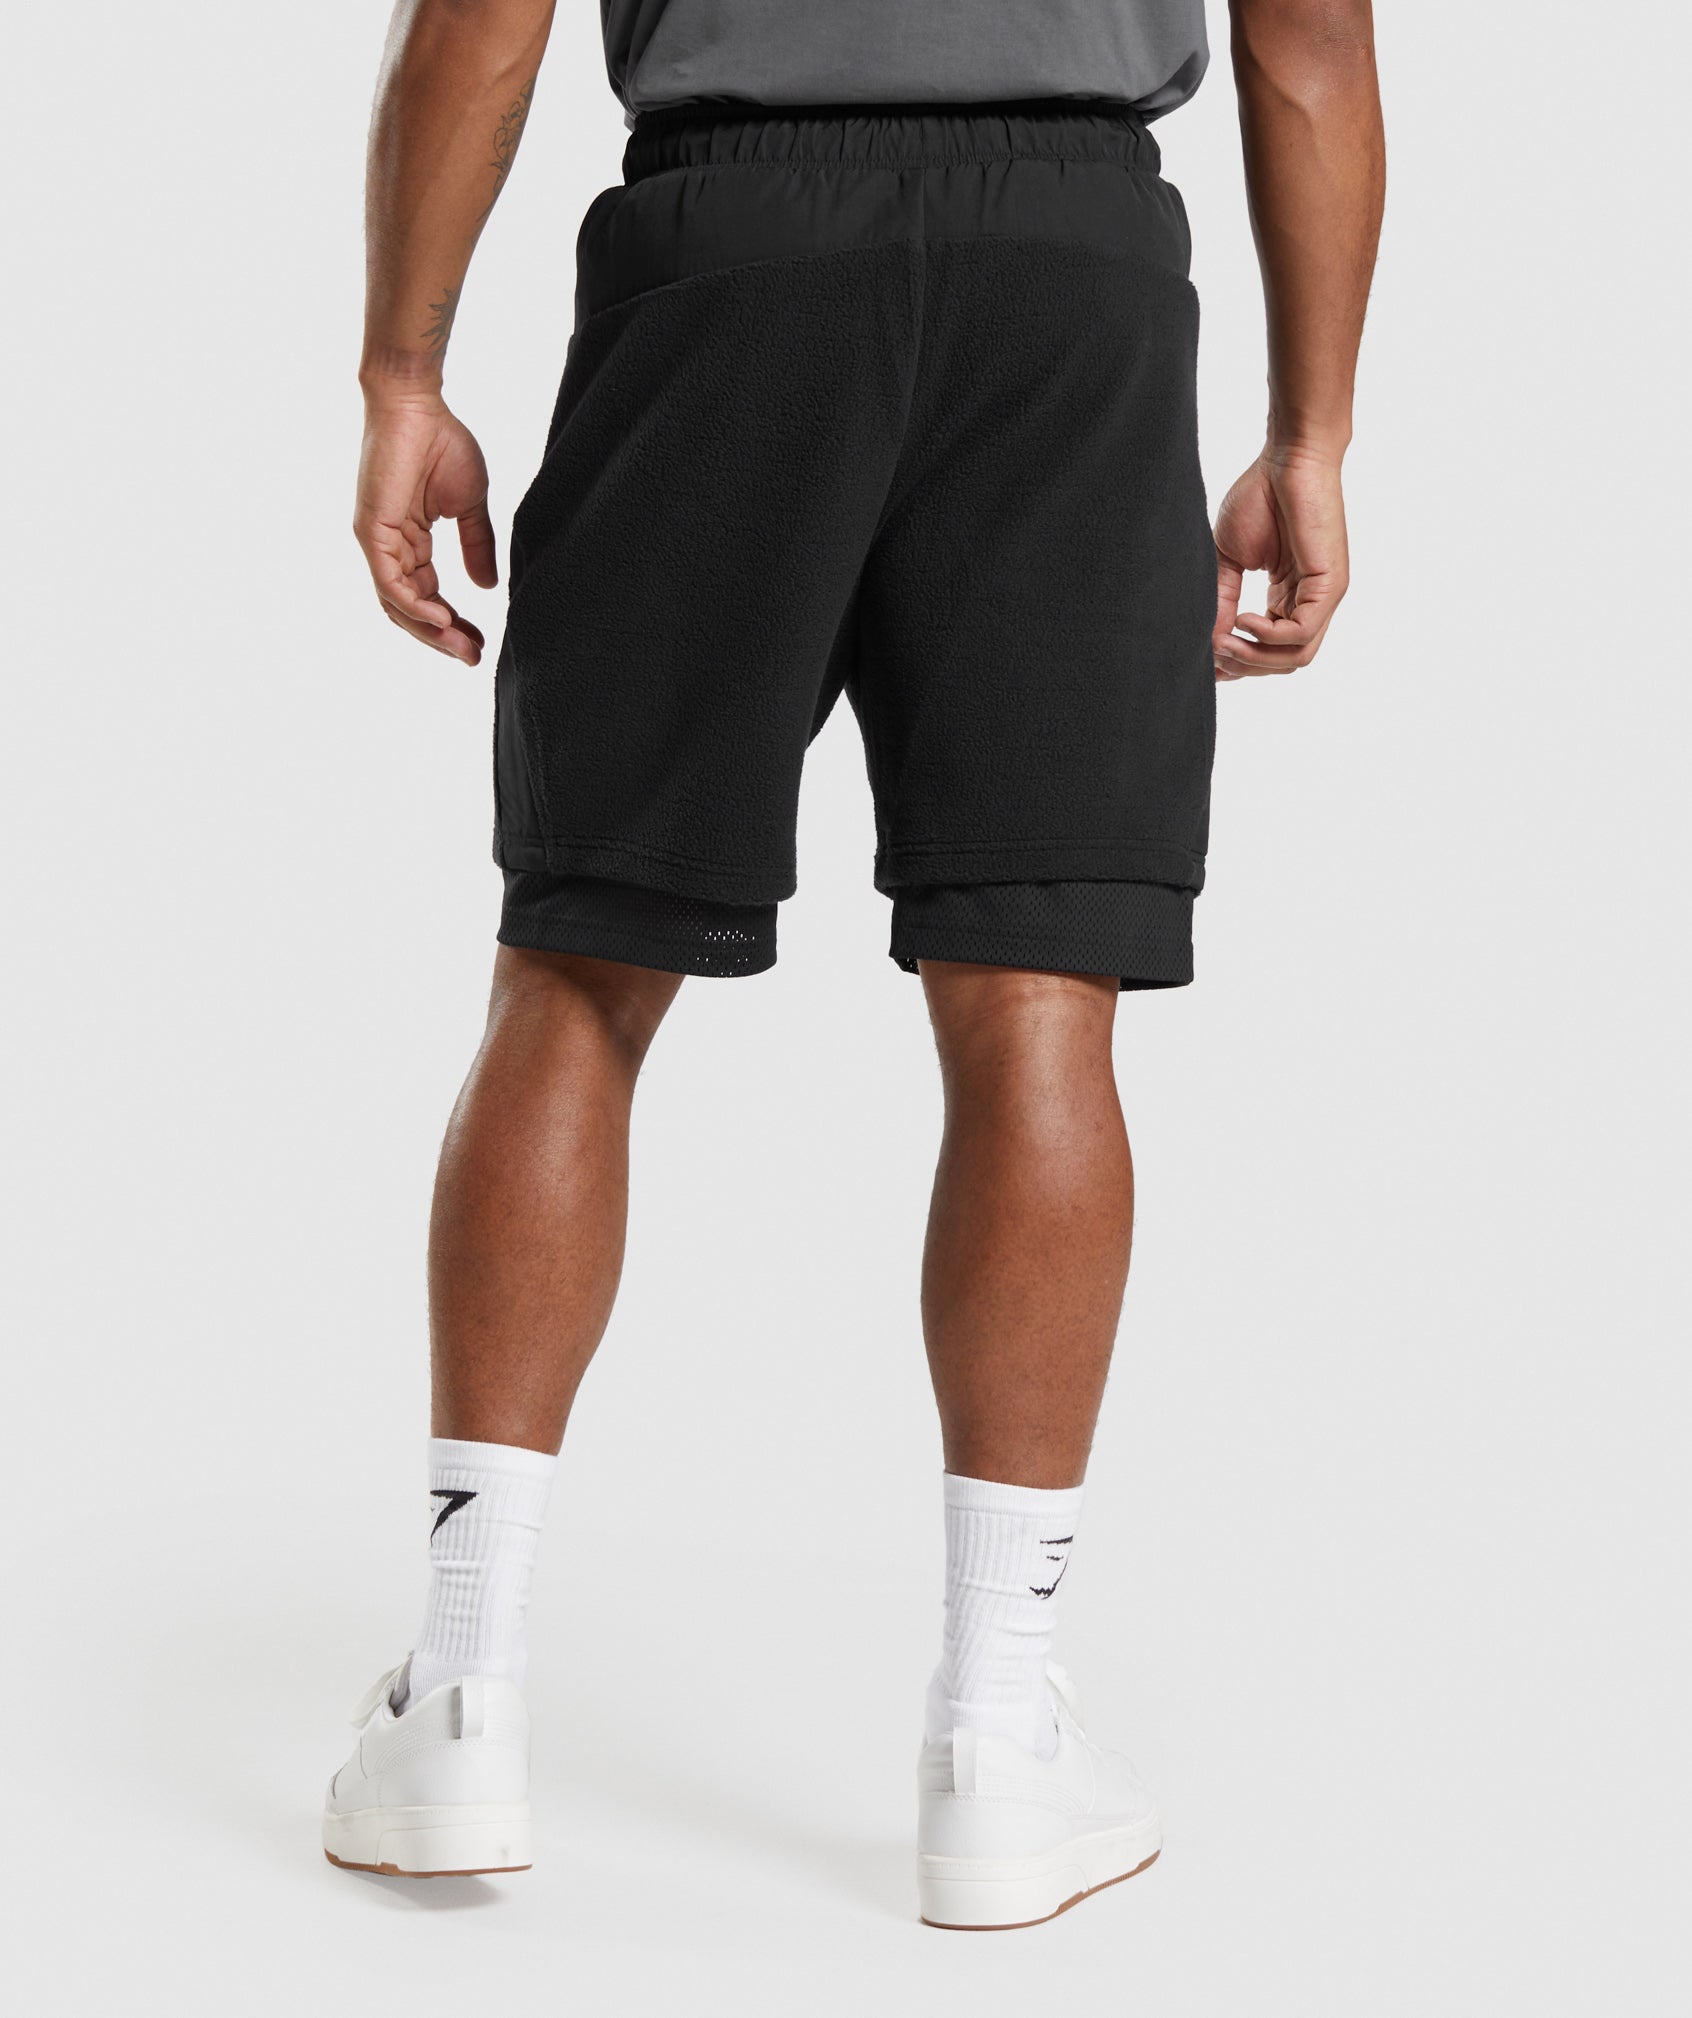 Vibes Shorts in Black - view 2